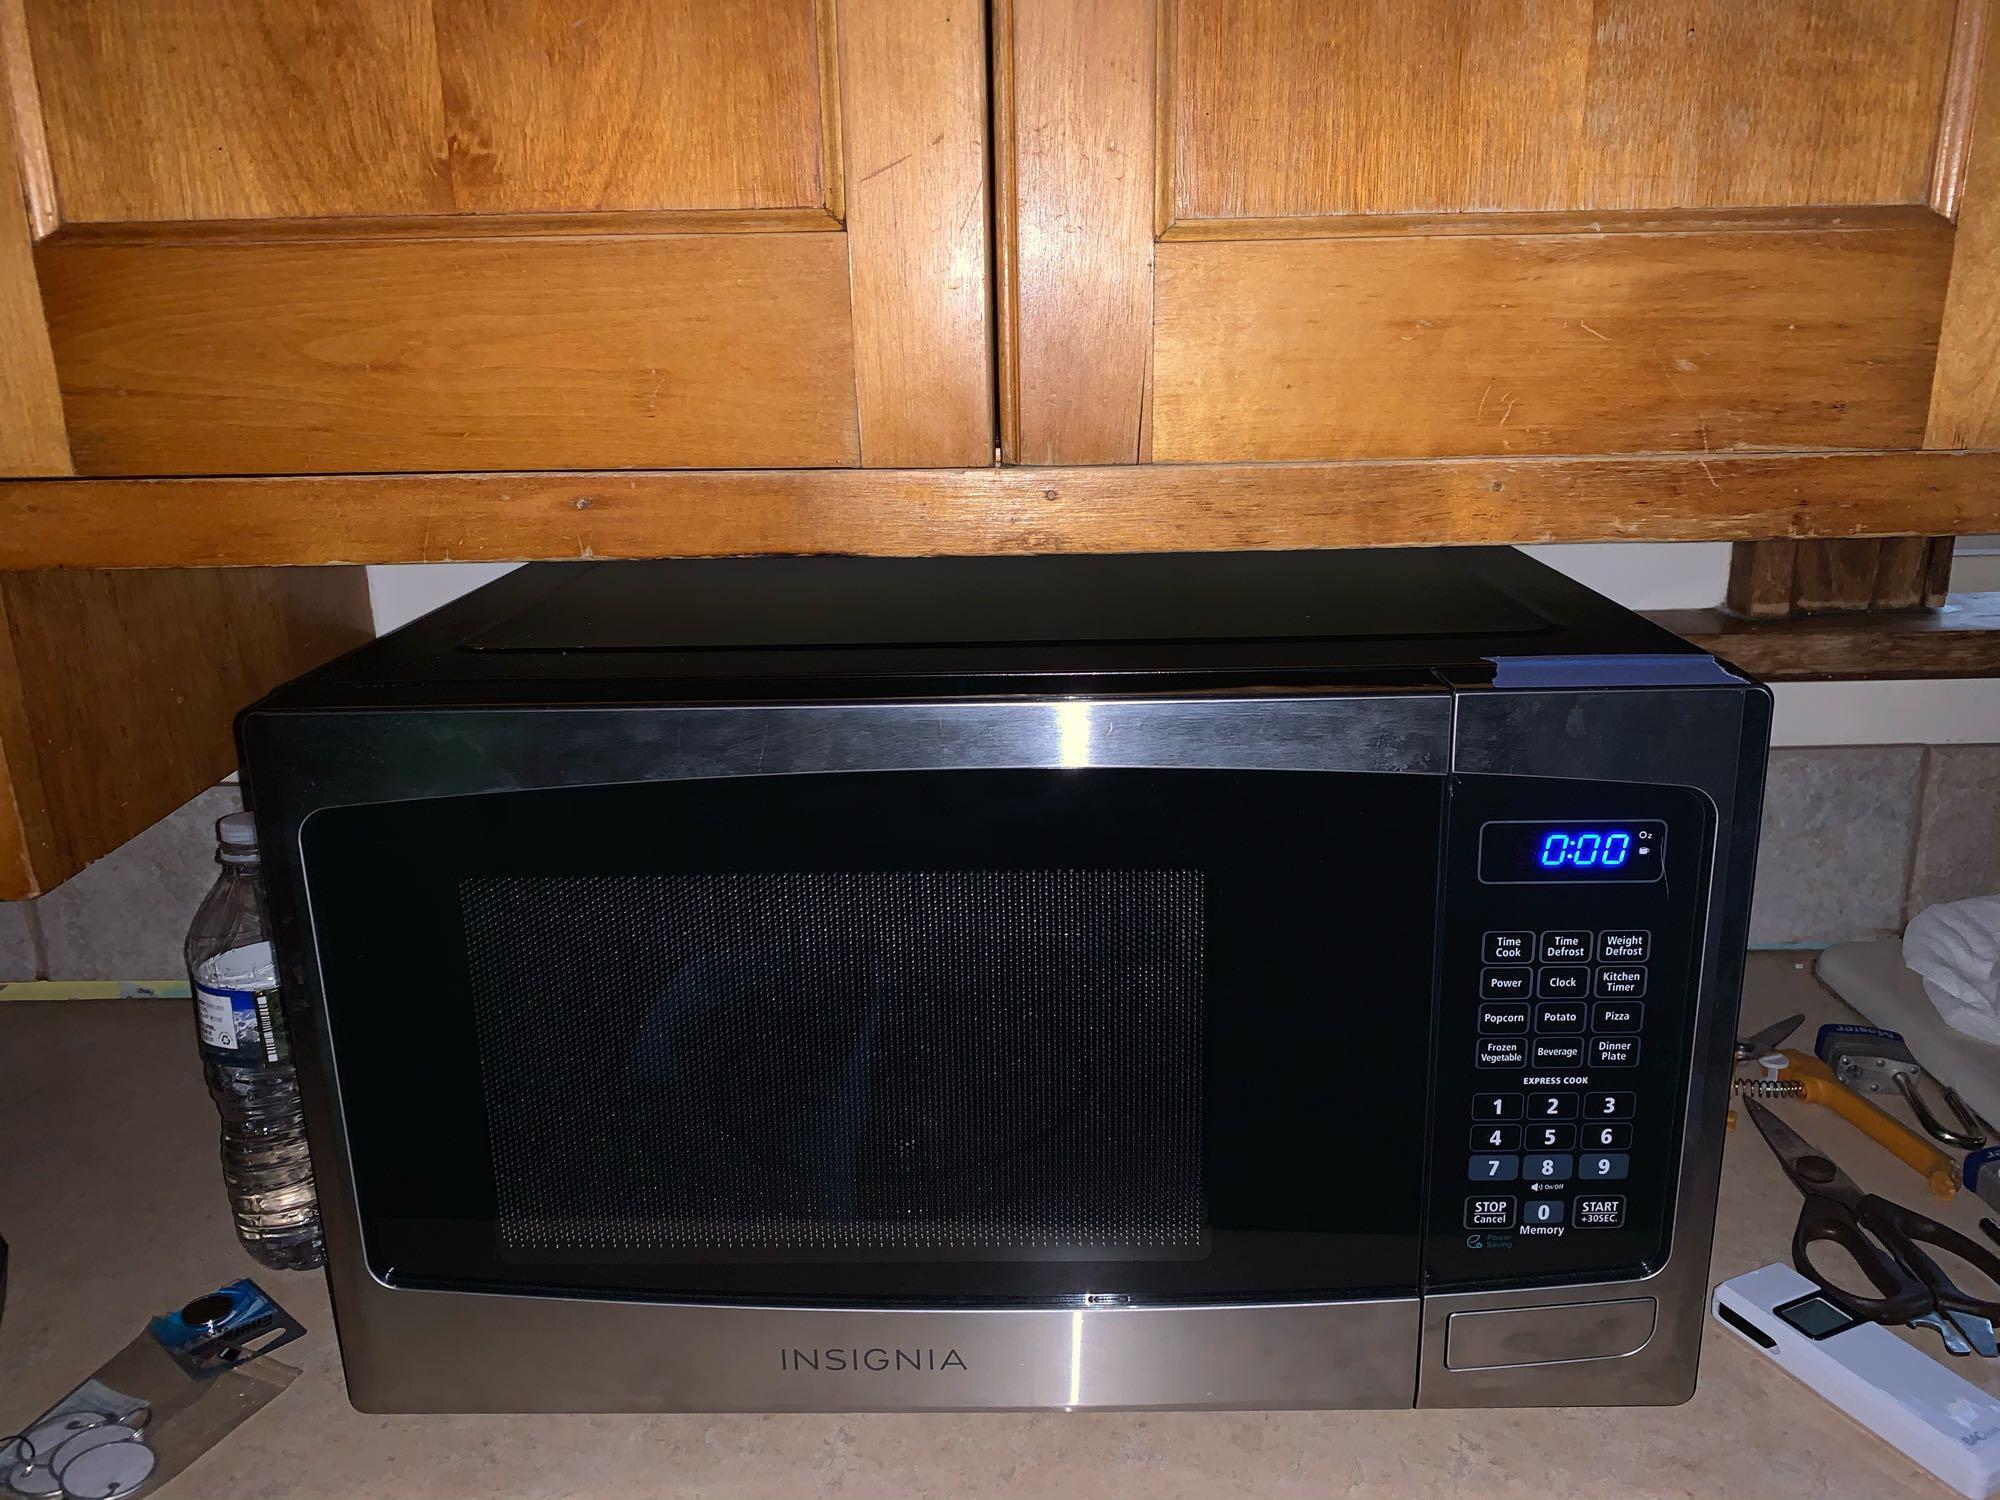 Insignia Microwave Oven Model NS-MW09SS8. Sta, WHITEFORD Part 1  Contractors, Tools, Audi, Harley Davidson, Honda 919, Leather Furniture, 3D  LED TV, Snowblower,Tools